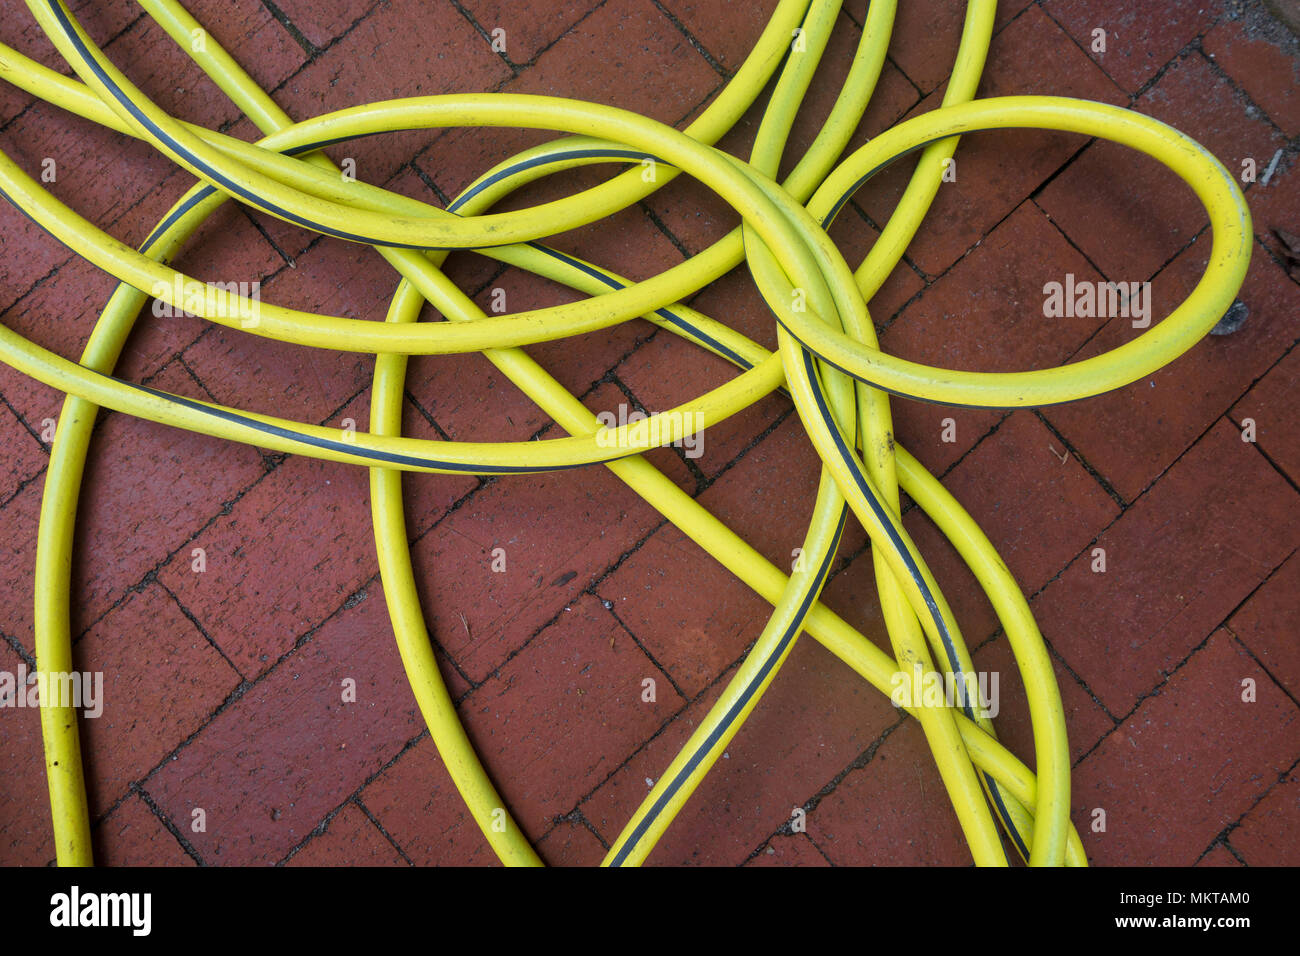 A yellow garden hose forms an interesting pattern of curves on a brick sidewalk Stock Photo